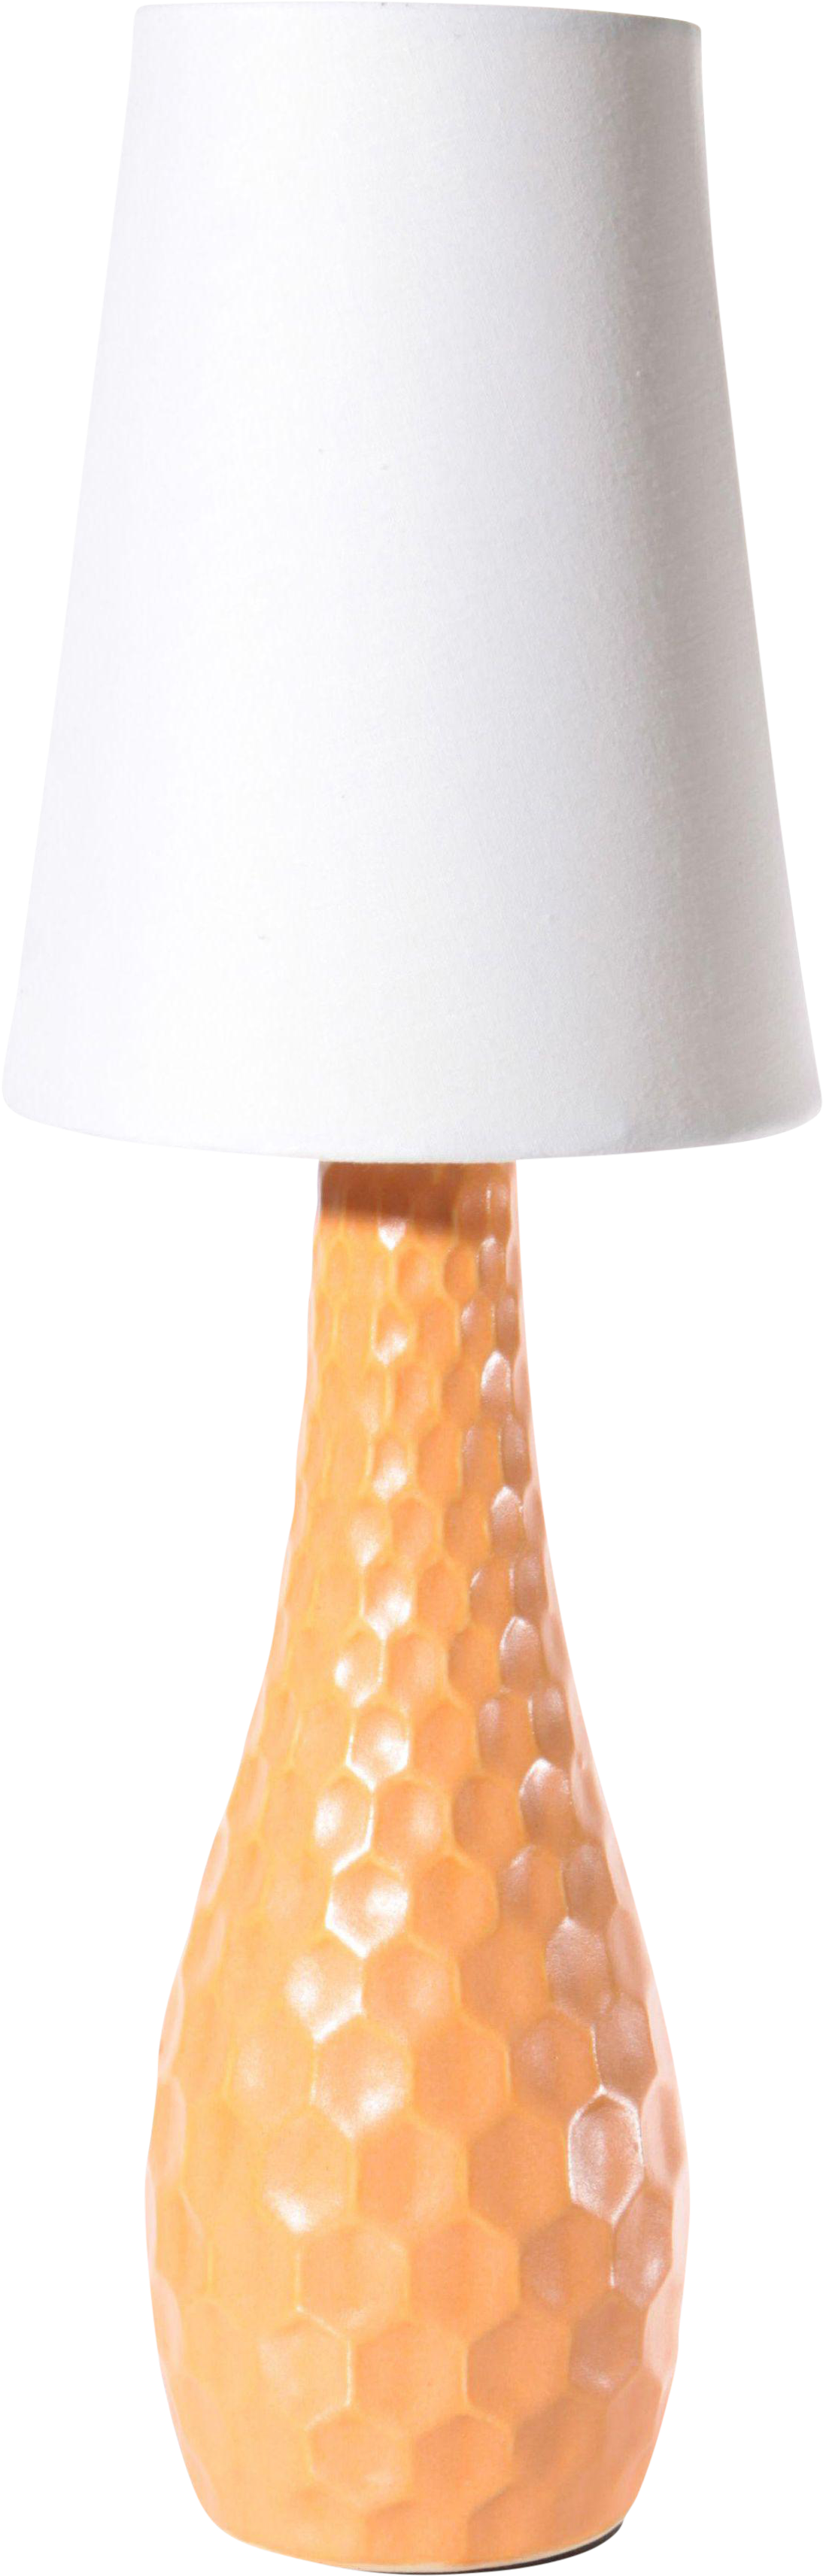 Hurry Honeycomb Lamp White Table Base From Honeycomb - Lampshade (1214x3804)